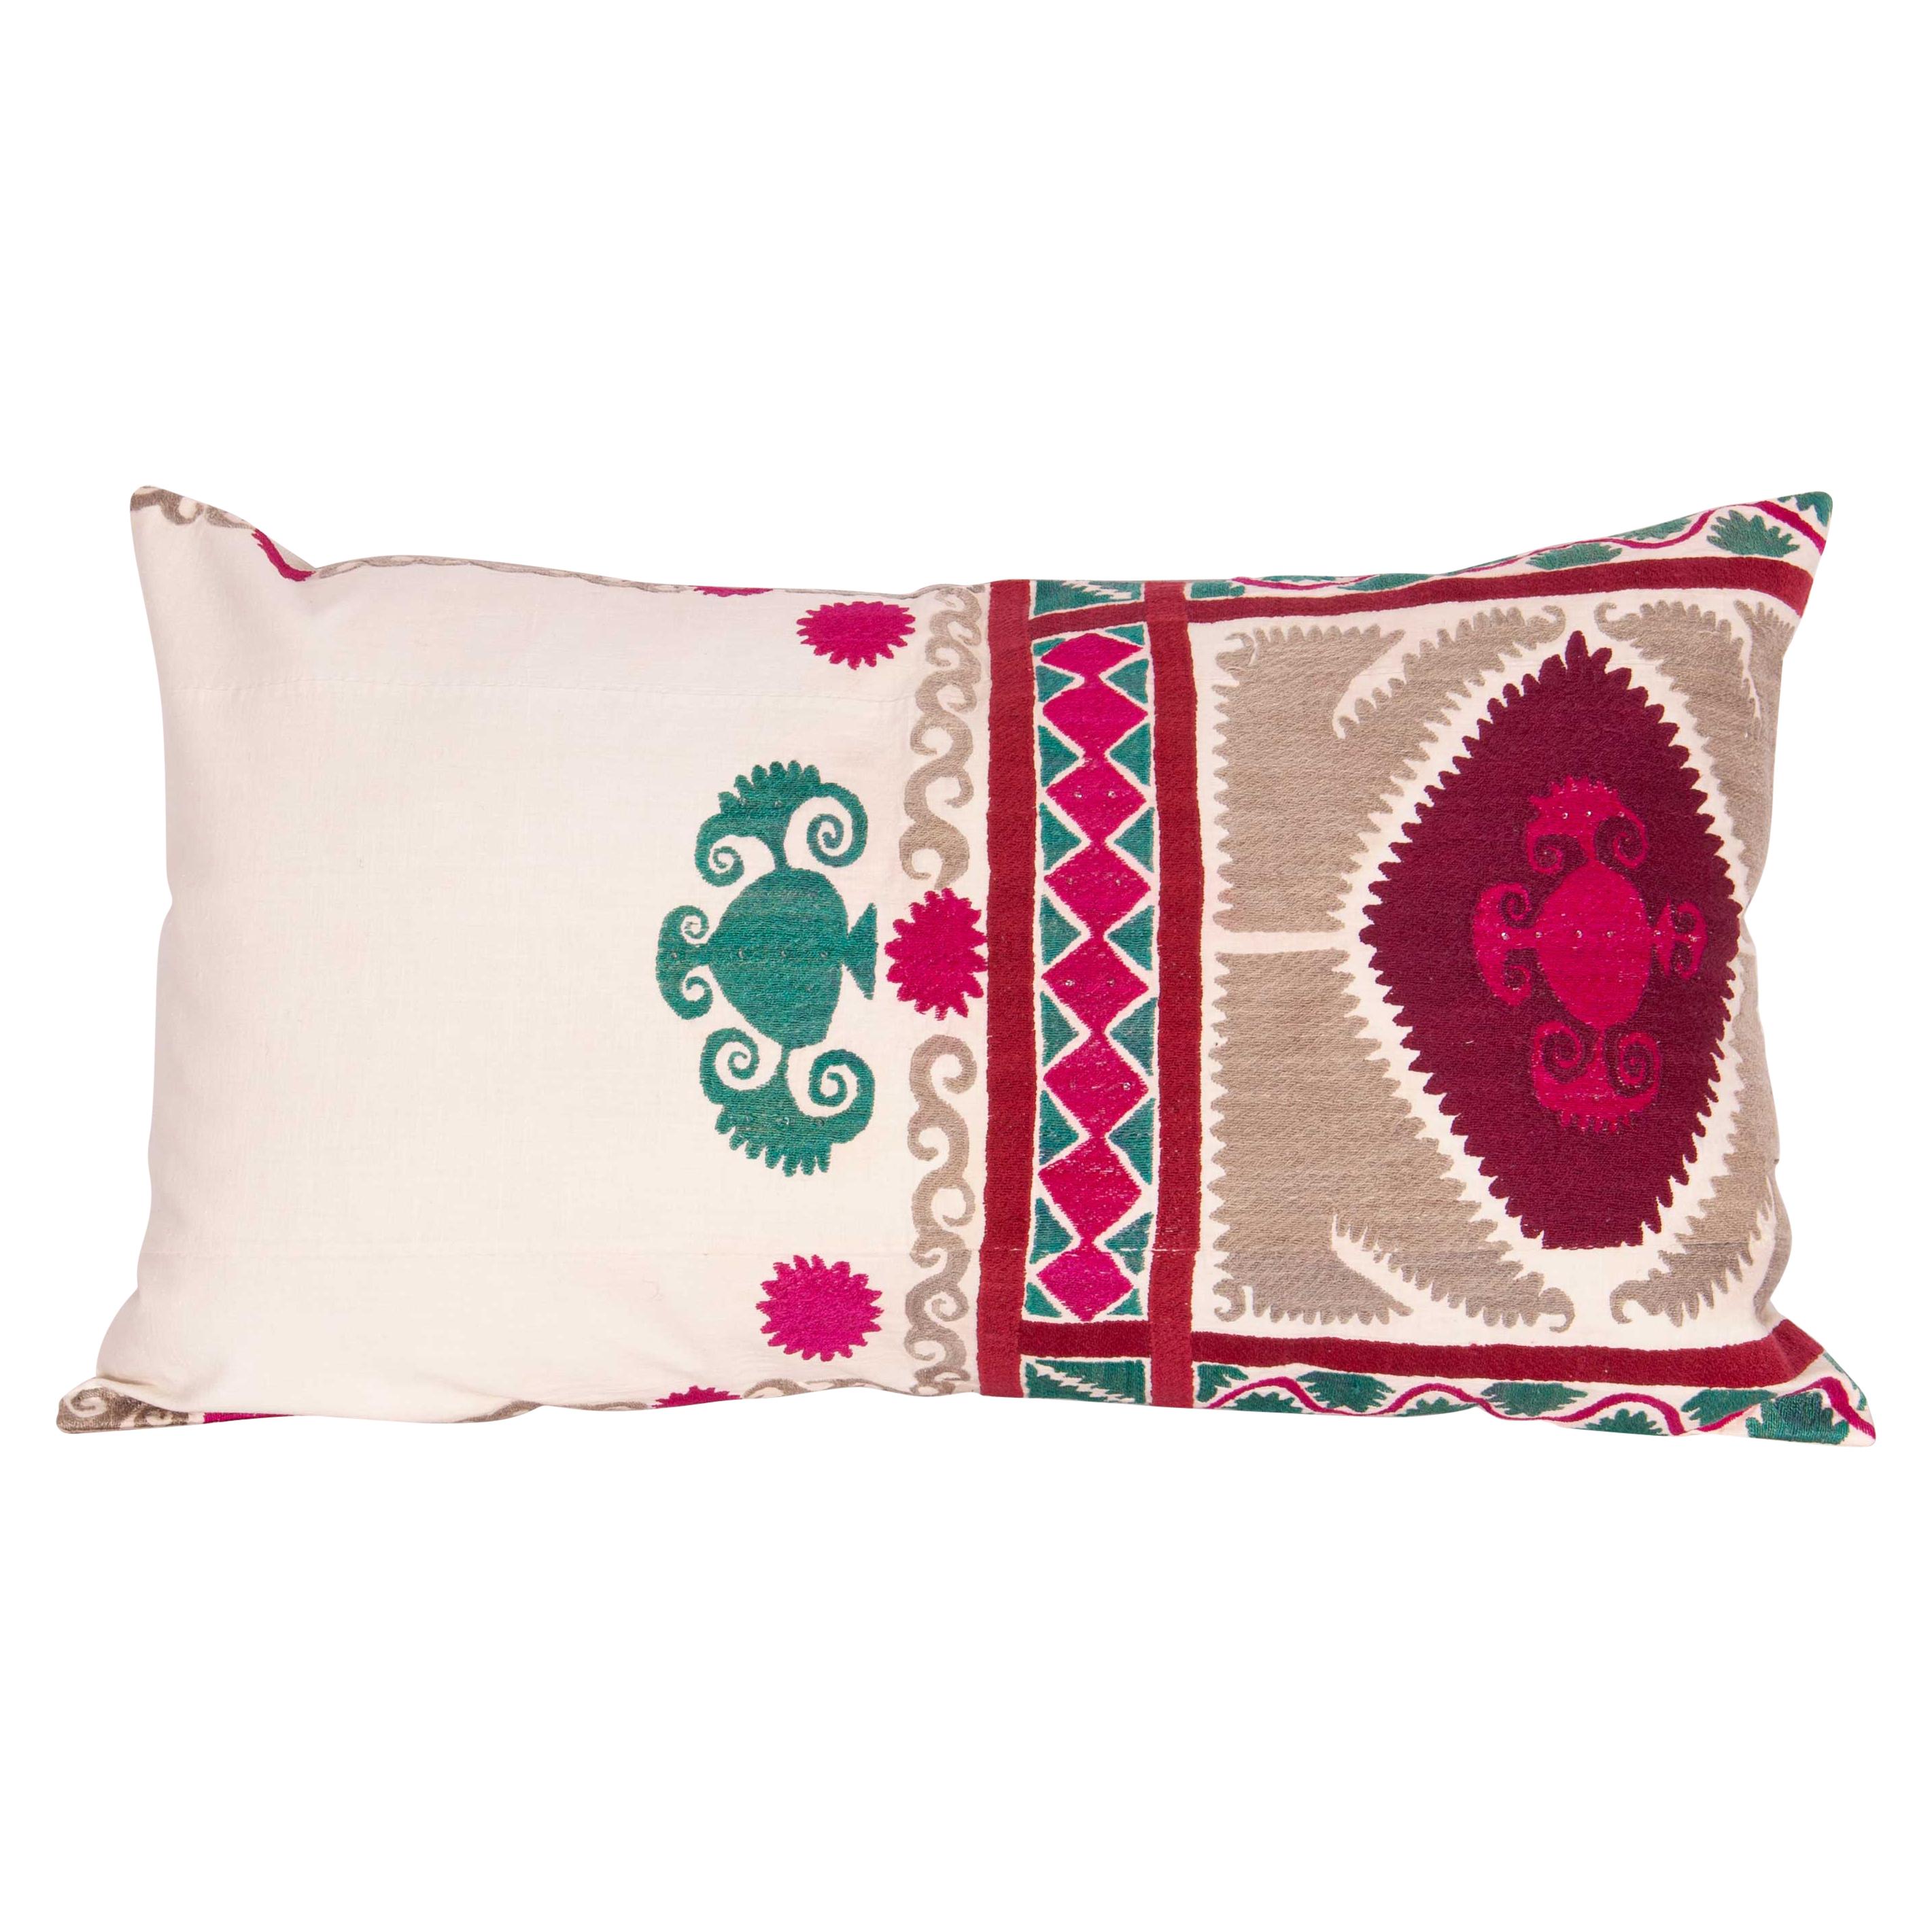 Pillow Case Made from a Vintage Suzani, Uzbekistan, Mid-20th Century